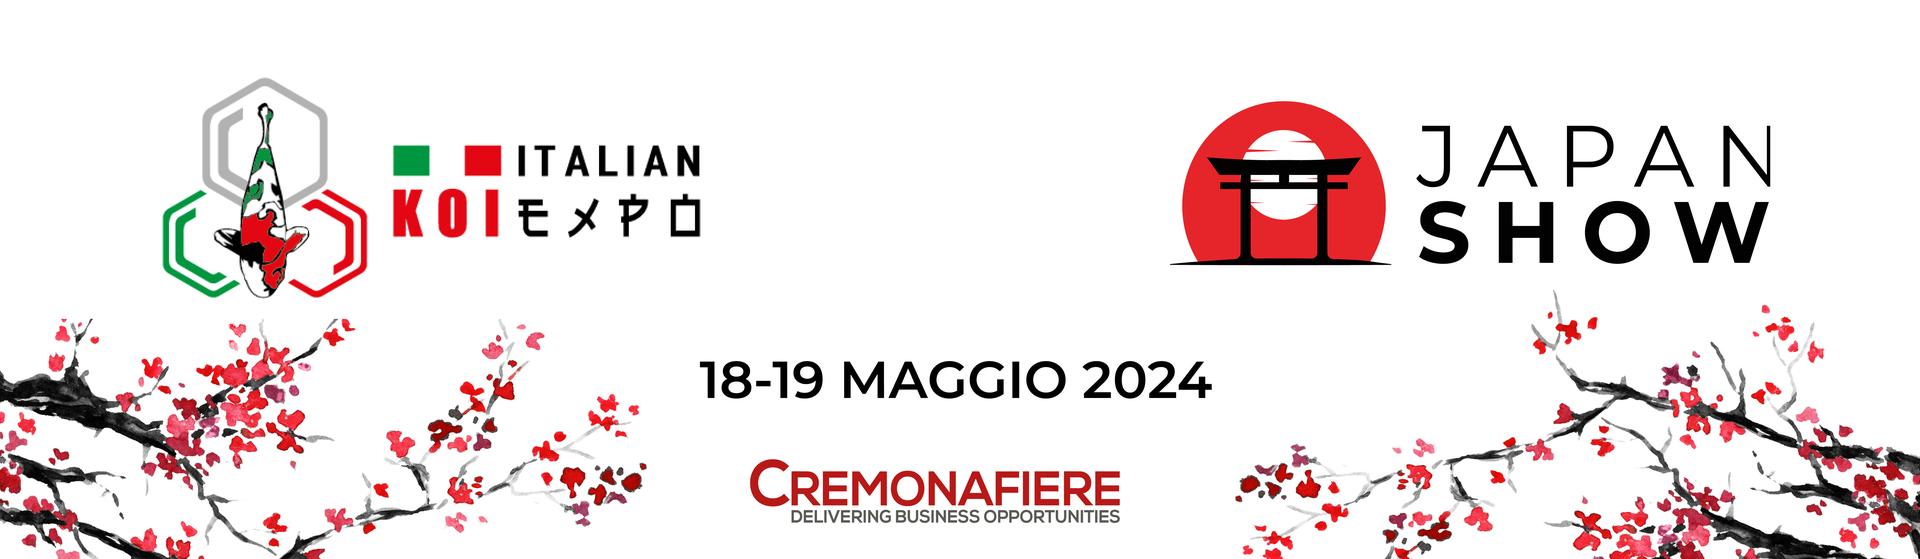 Japan Show at Cremona Fiere on 18 and 19 May